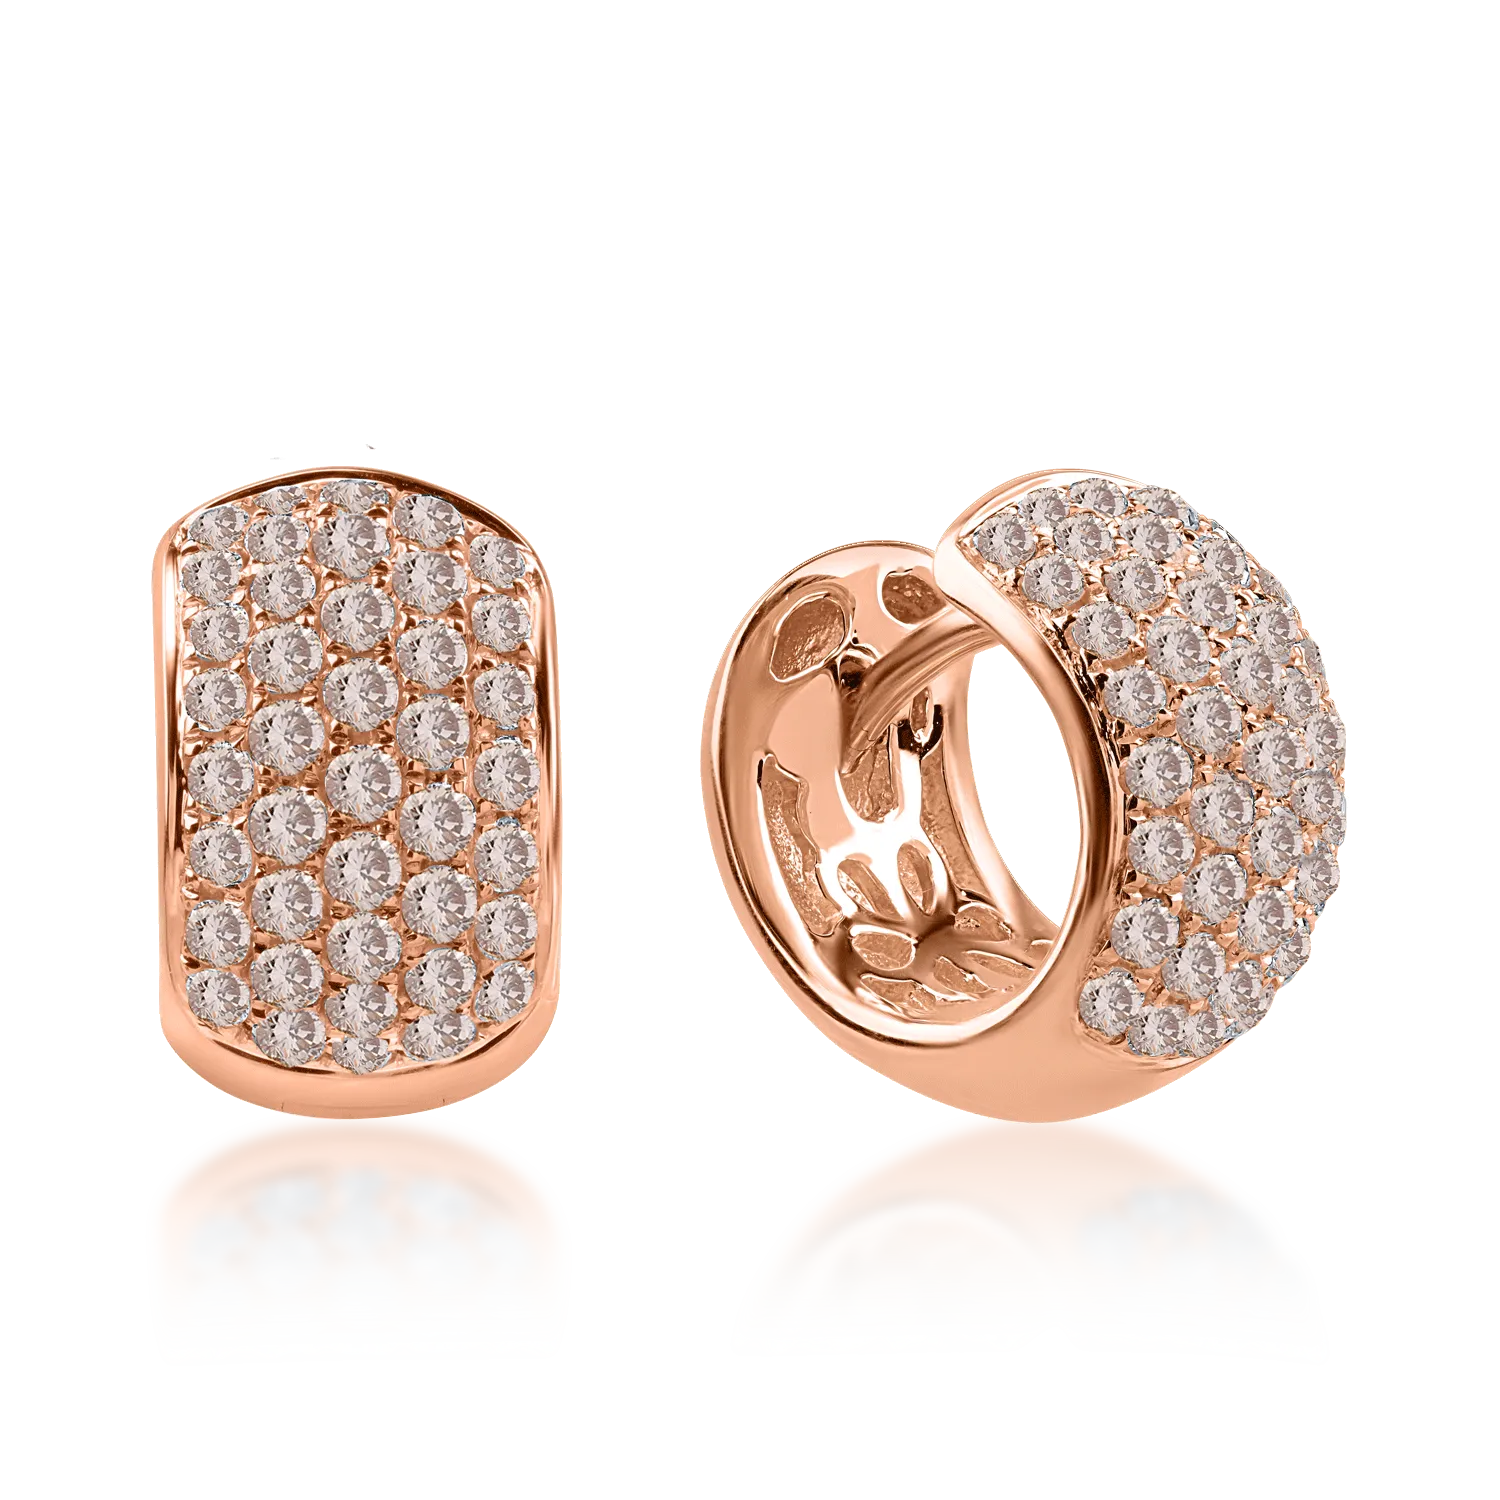 Rose gold earrings with 0.74ct brown diamonds